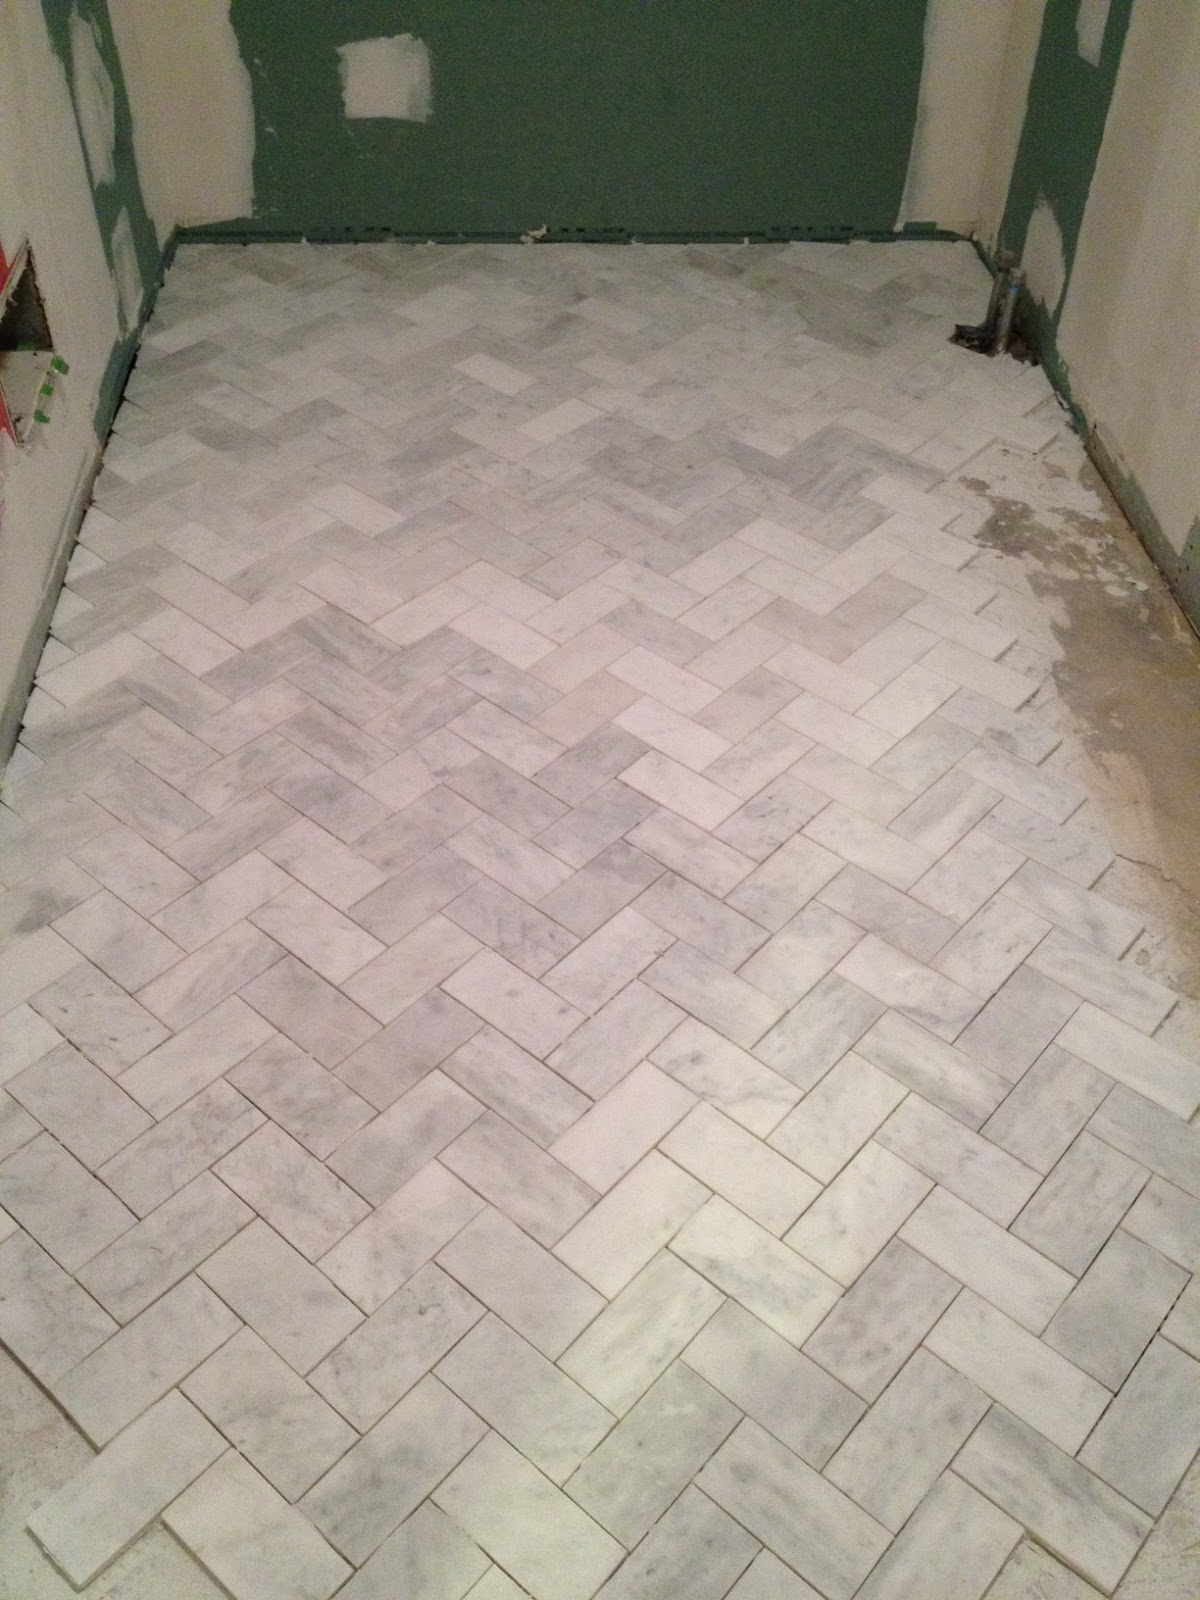 Here is an in progress photo of the carrara subway tile being ...